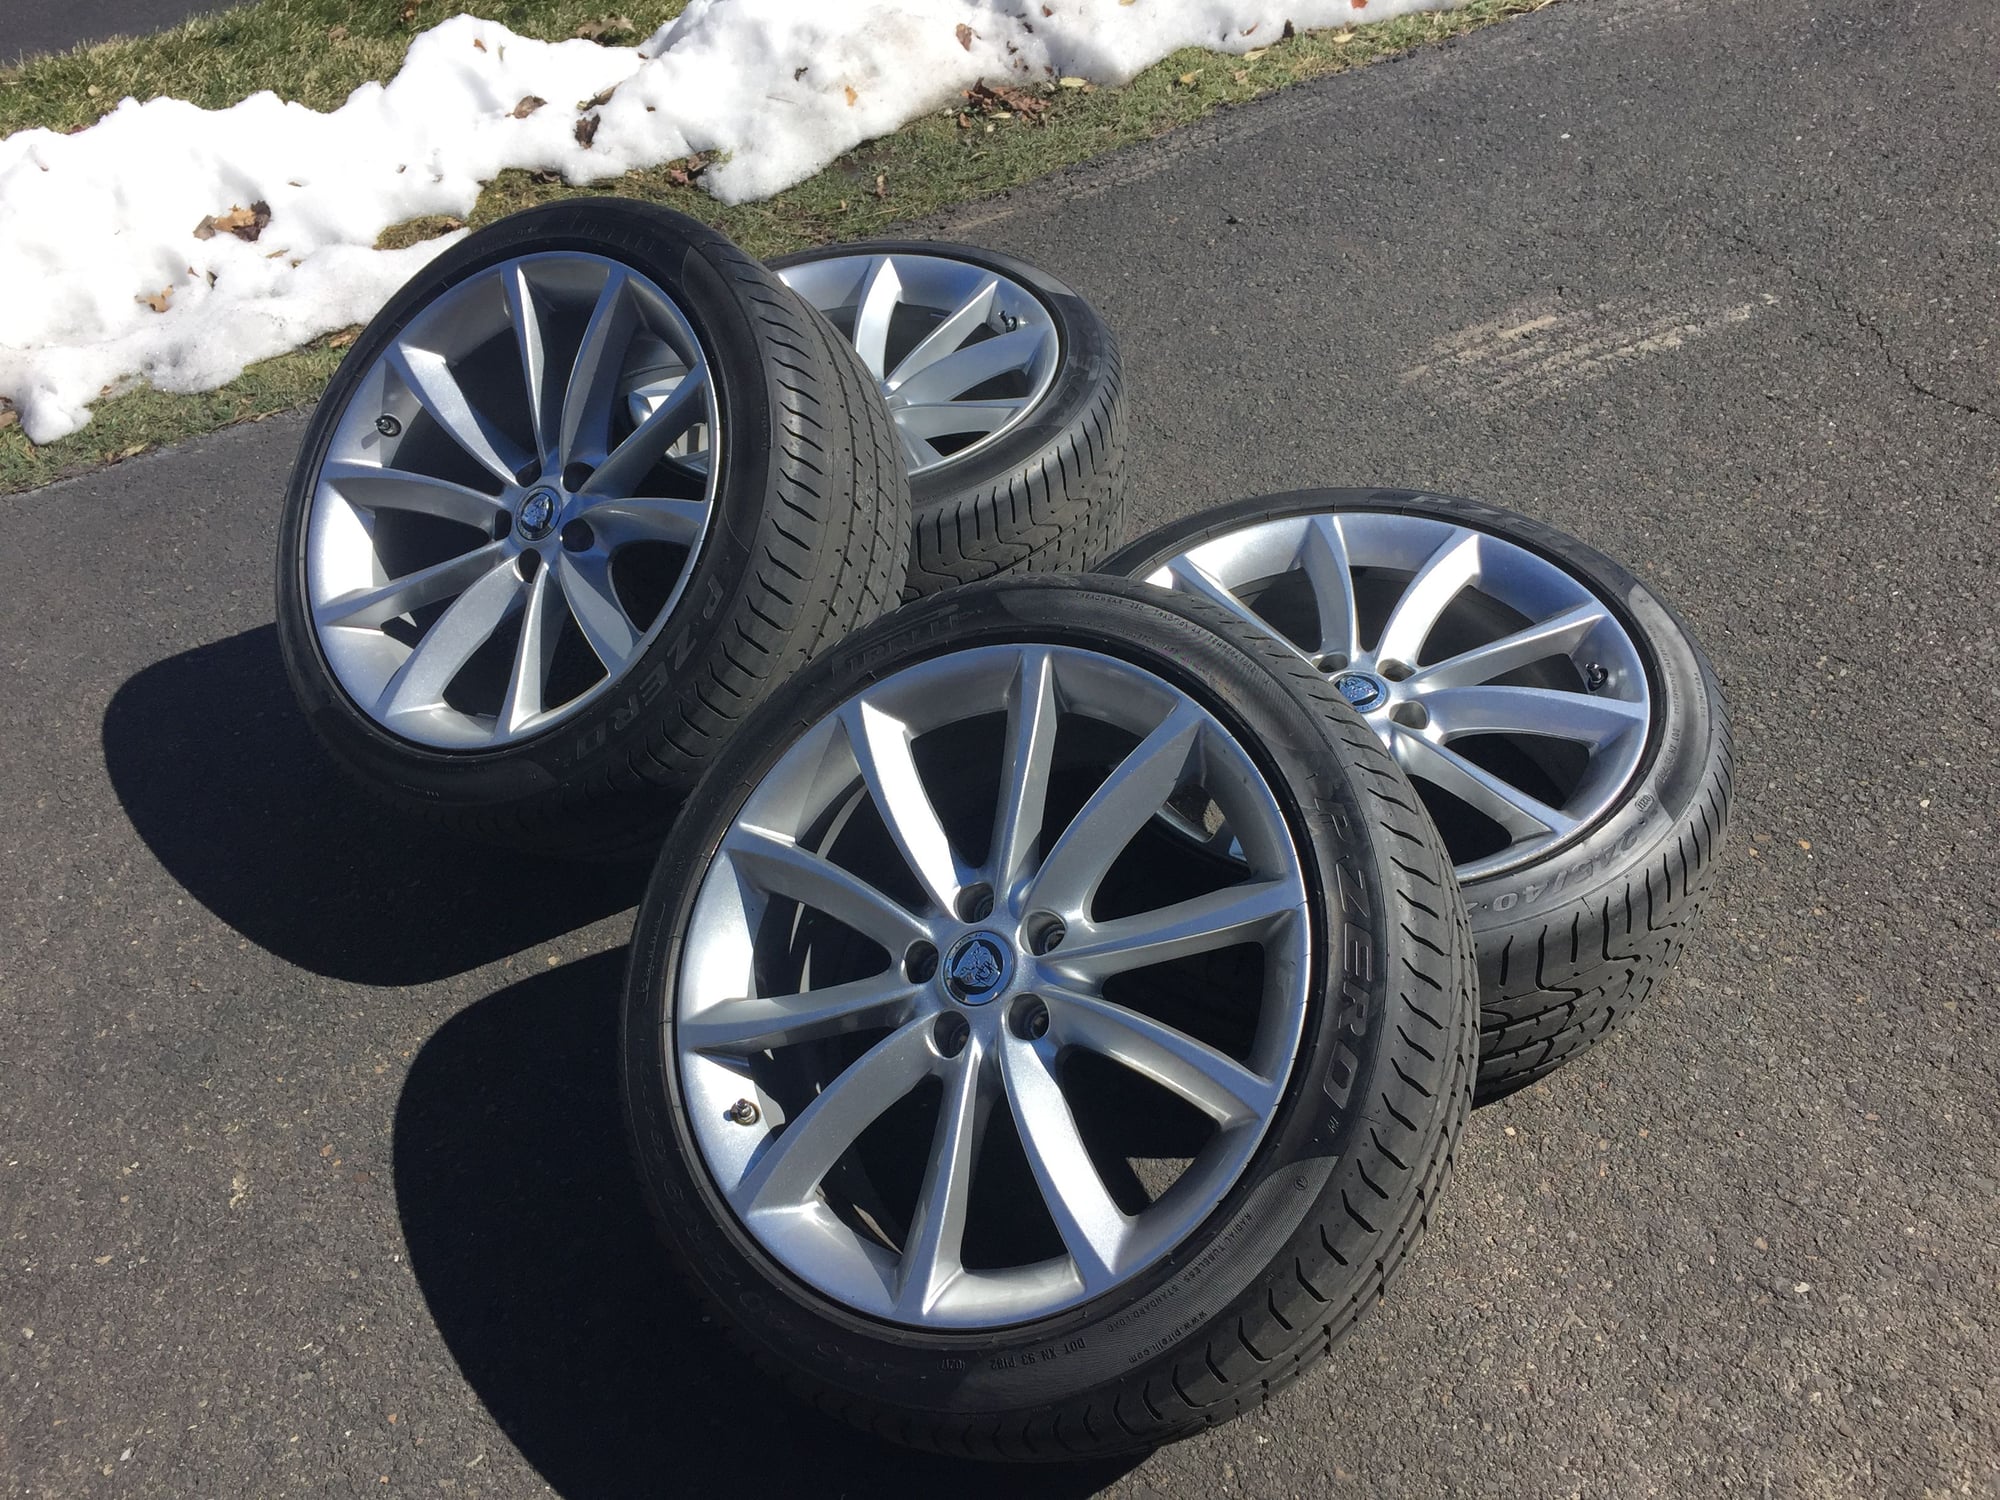 Wheels and Tires/Axles - F Type 19" Propeller Wheels, Stock Tires, and TPMS for Sale - Used - 2014 to 2019 Jaguar F-Type - Jamison, PA 18929, United States